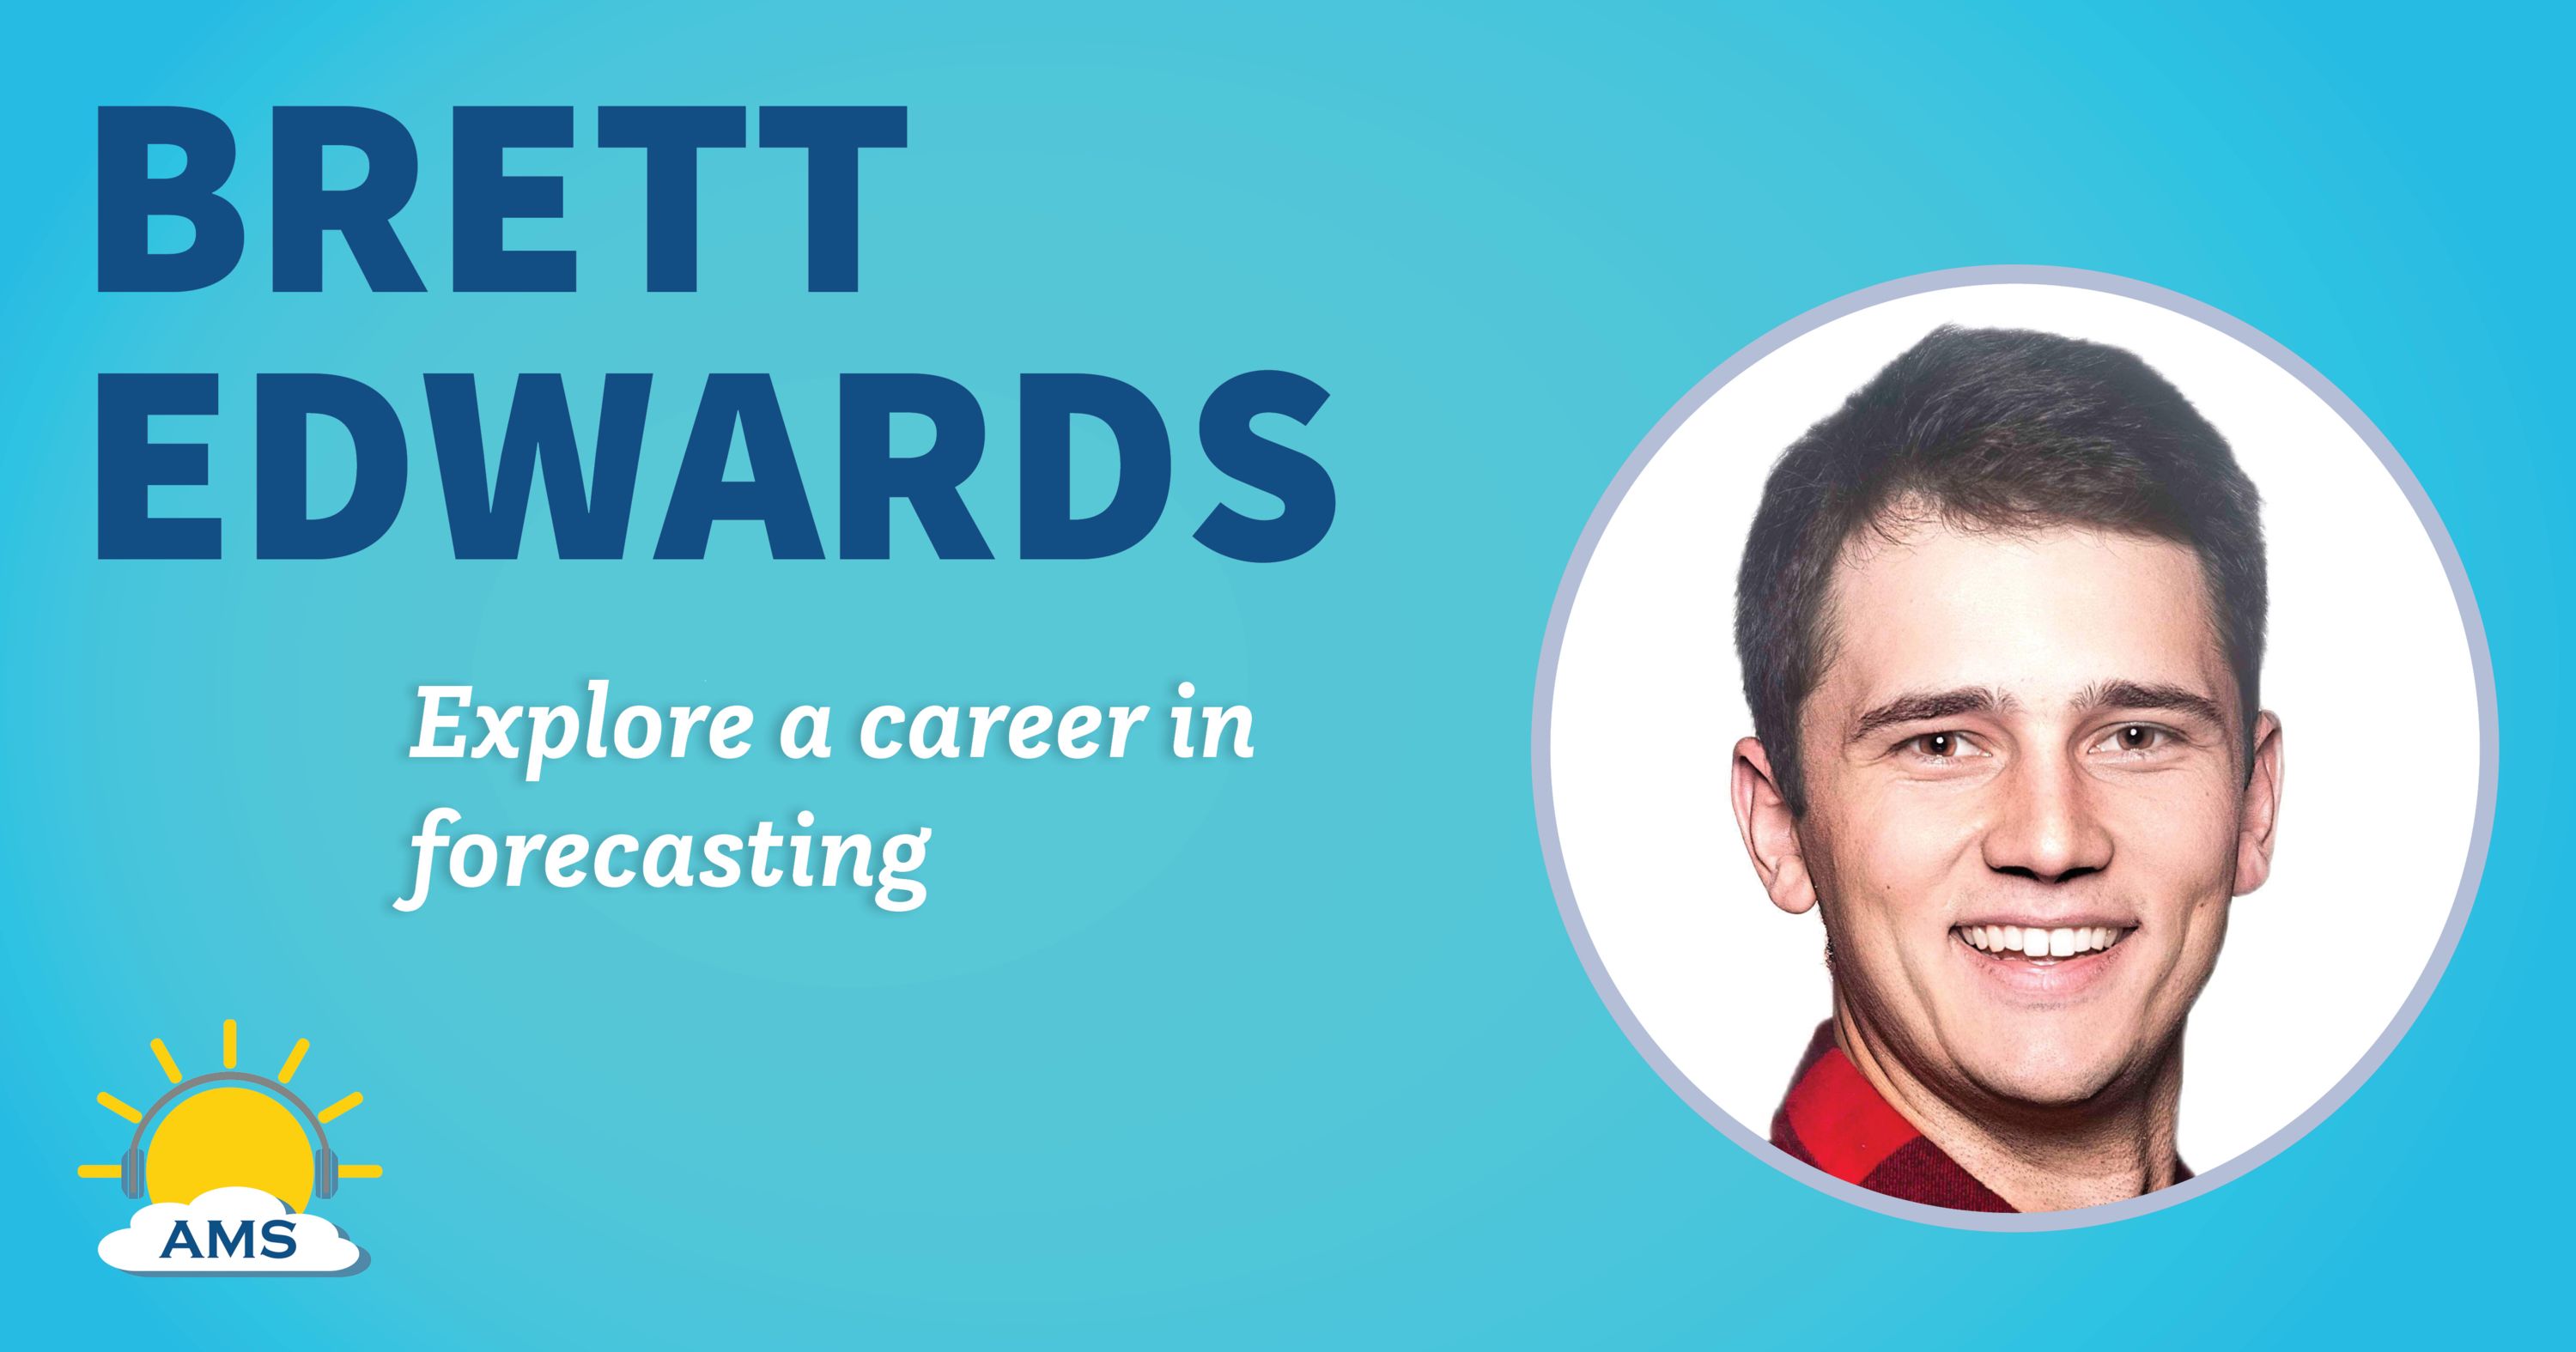 brett edwards headshot graphic with teaser text that reads &quotexplore a career in forecasting"